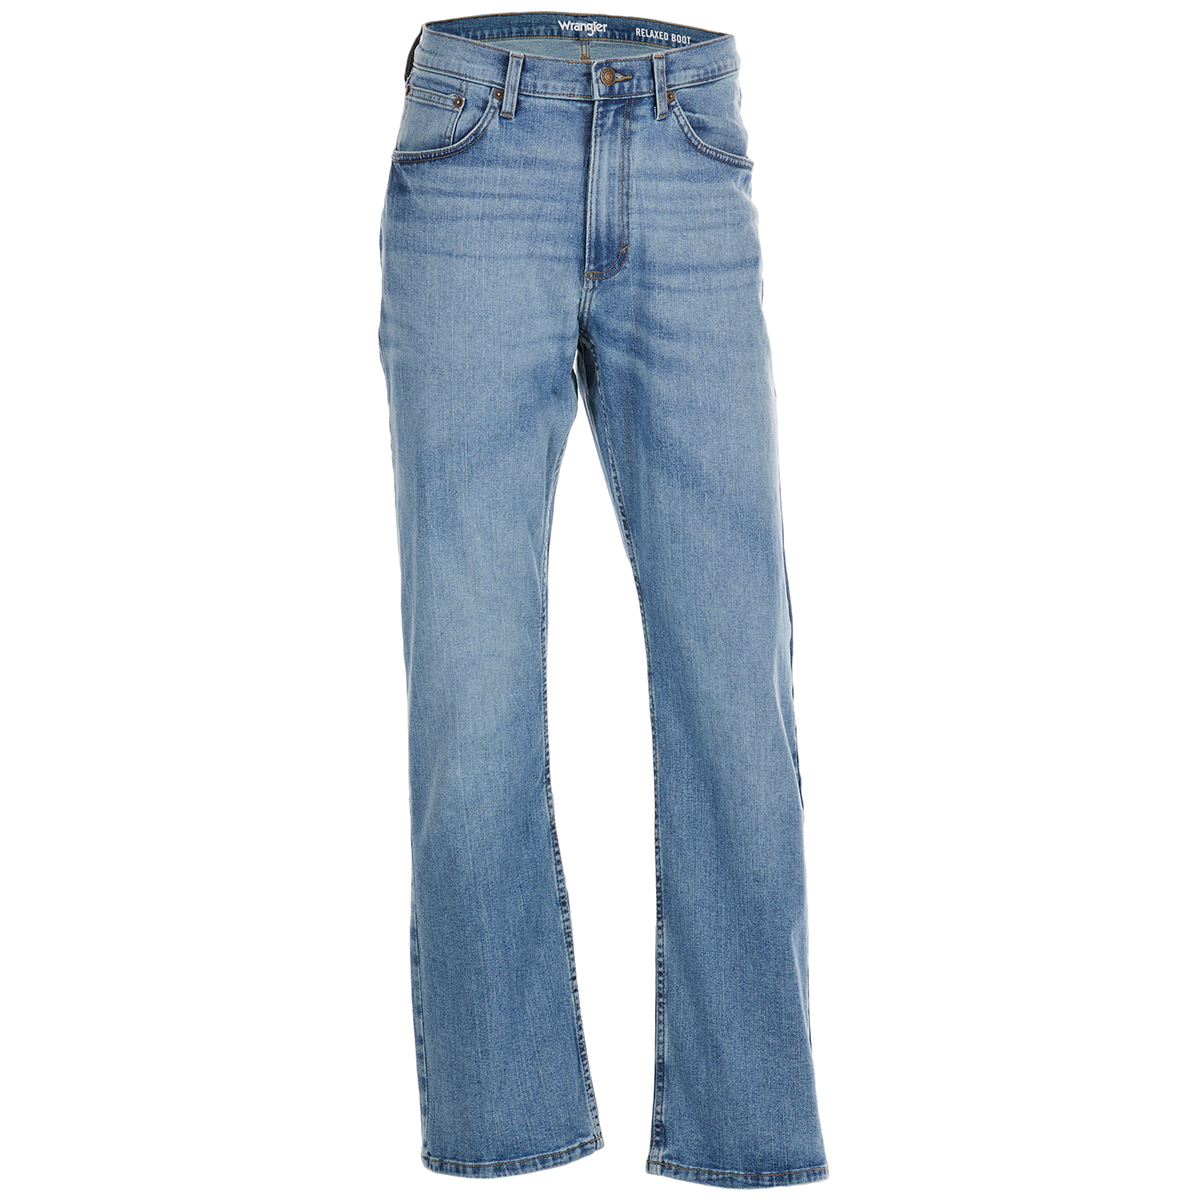 Wranglers Men's Relaxed Boot Cut Jeans